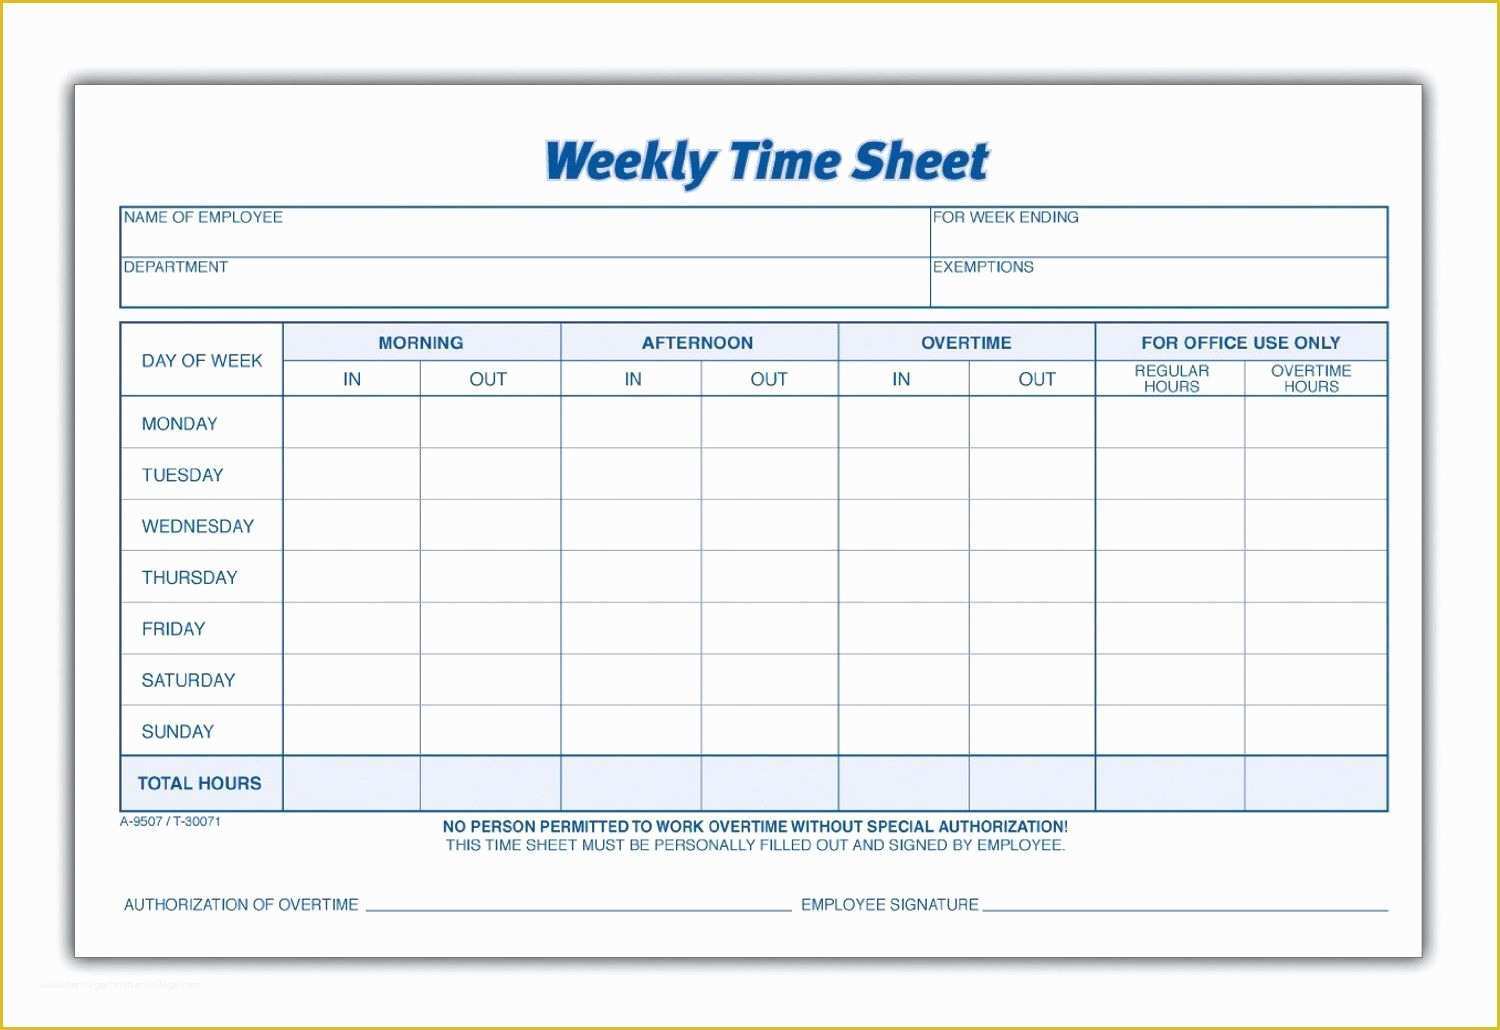 Daily Timesheet Template Free Printable Of Weekly Employee Time Sheet Good to Know